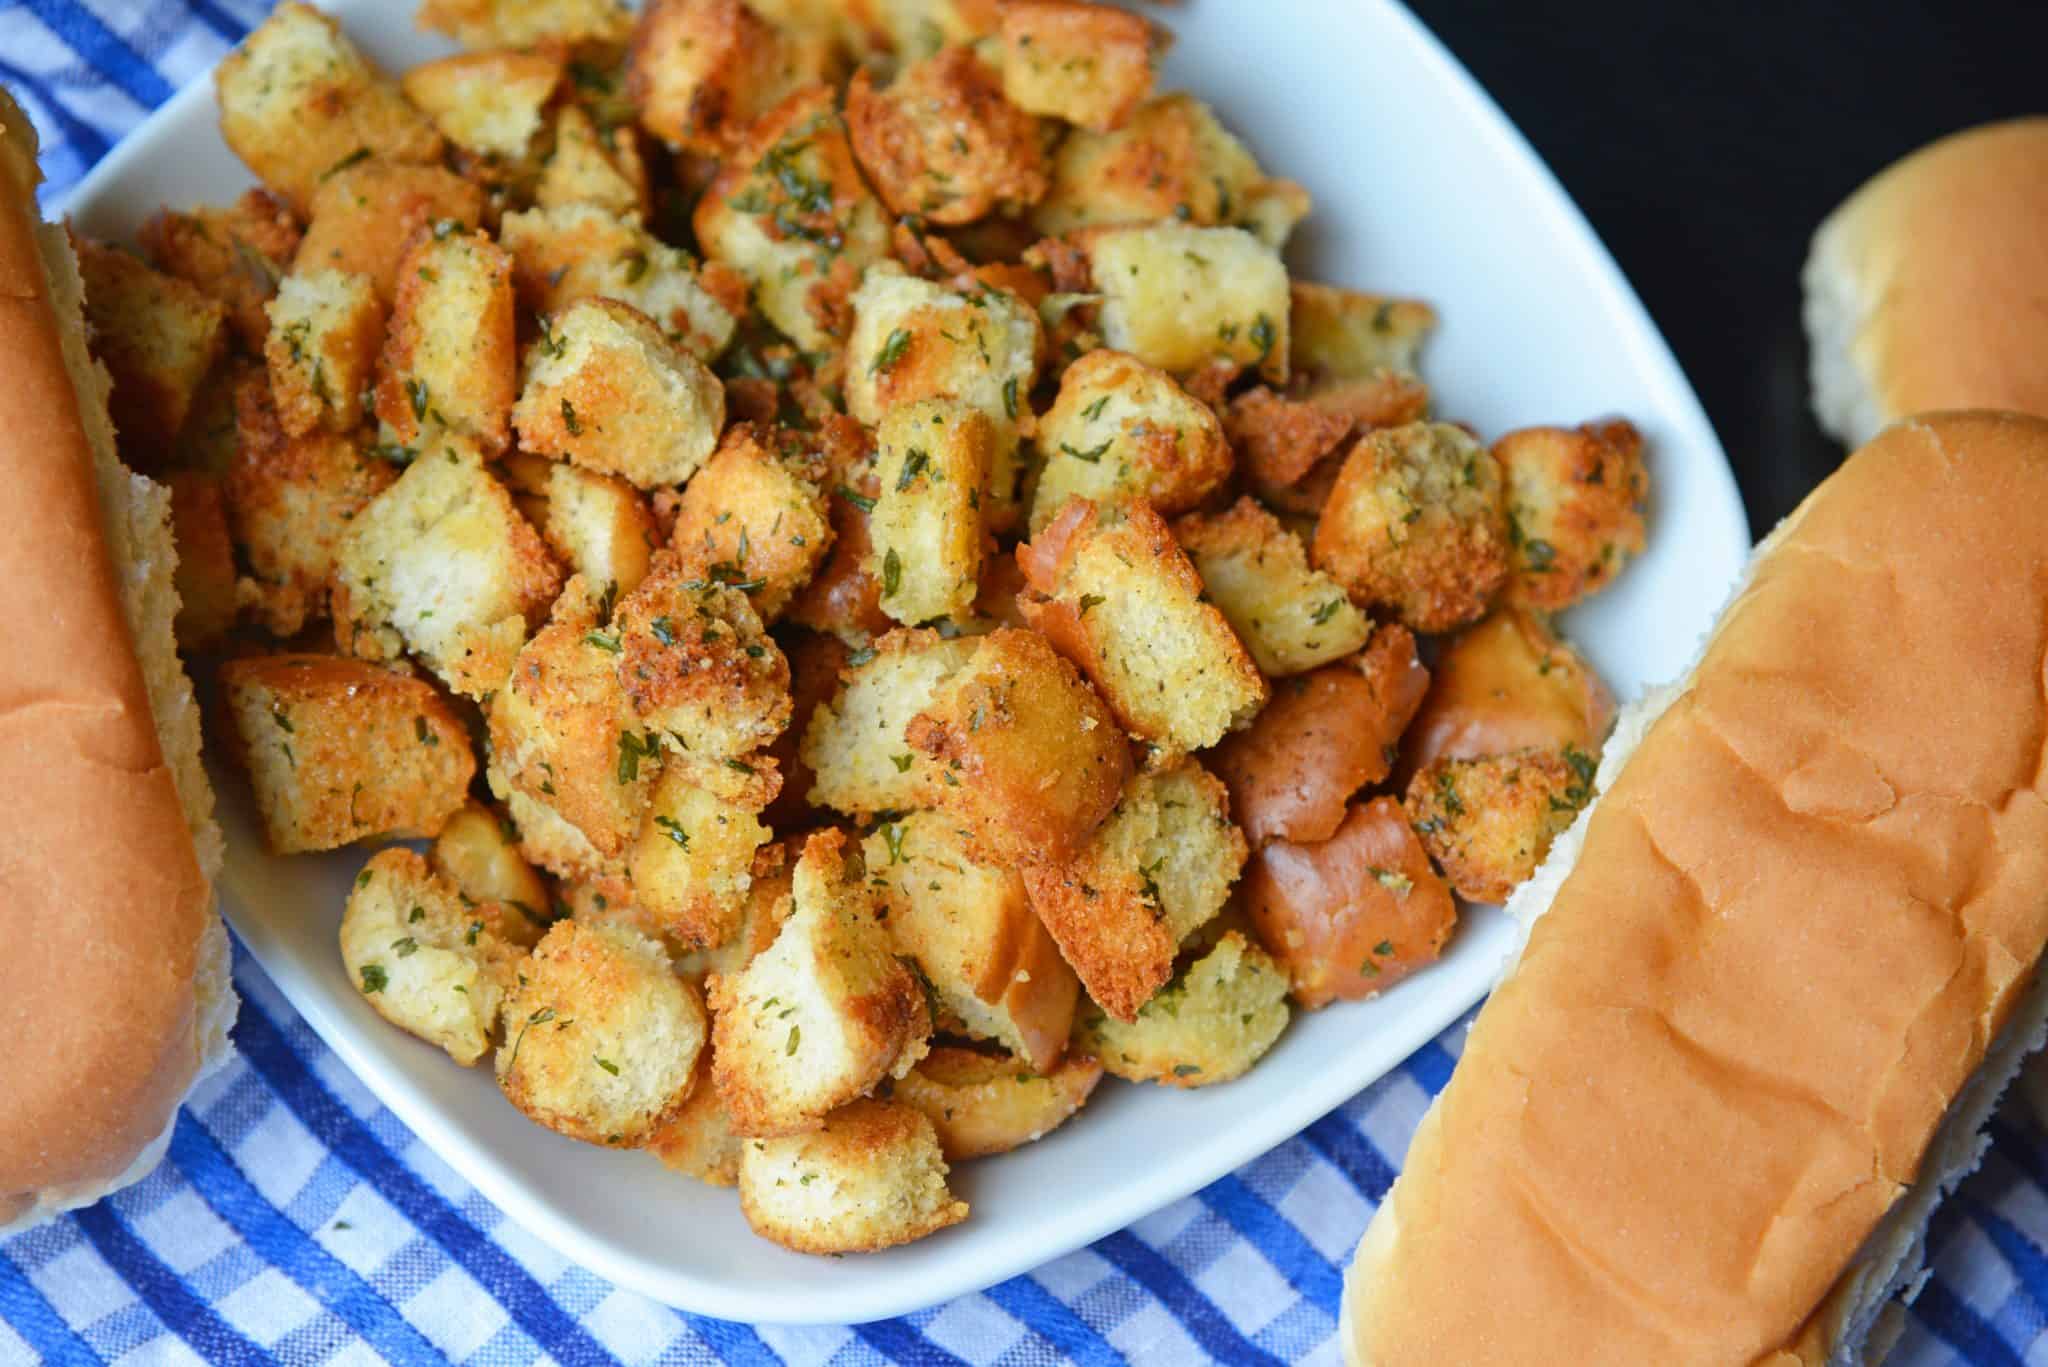 Hot Dog Bun Homemade Croutons with garlic, salt and parsley are the best for salads, soup and more! Learn how to make croutons easily with this crouton recipe. #homemadecroutons #croutonrecipe #howtomakecroutons www.savoryexperiments.com 